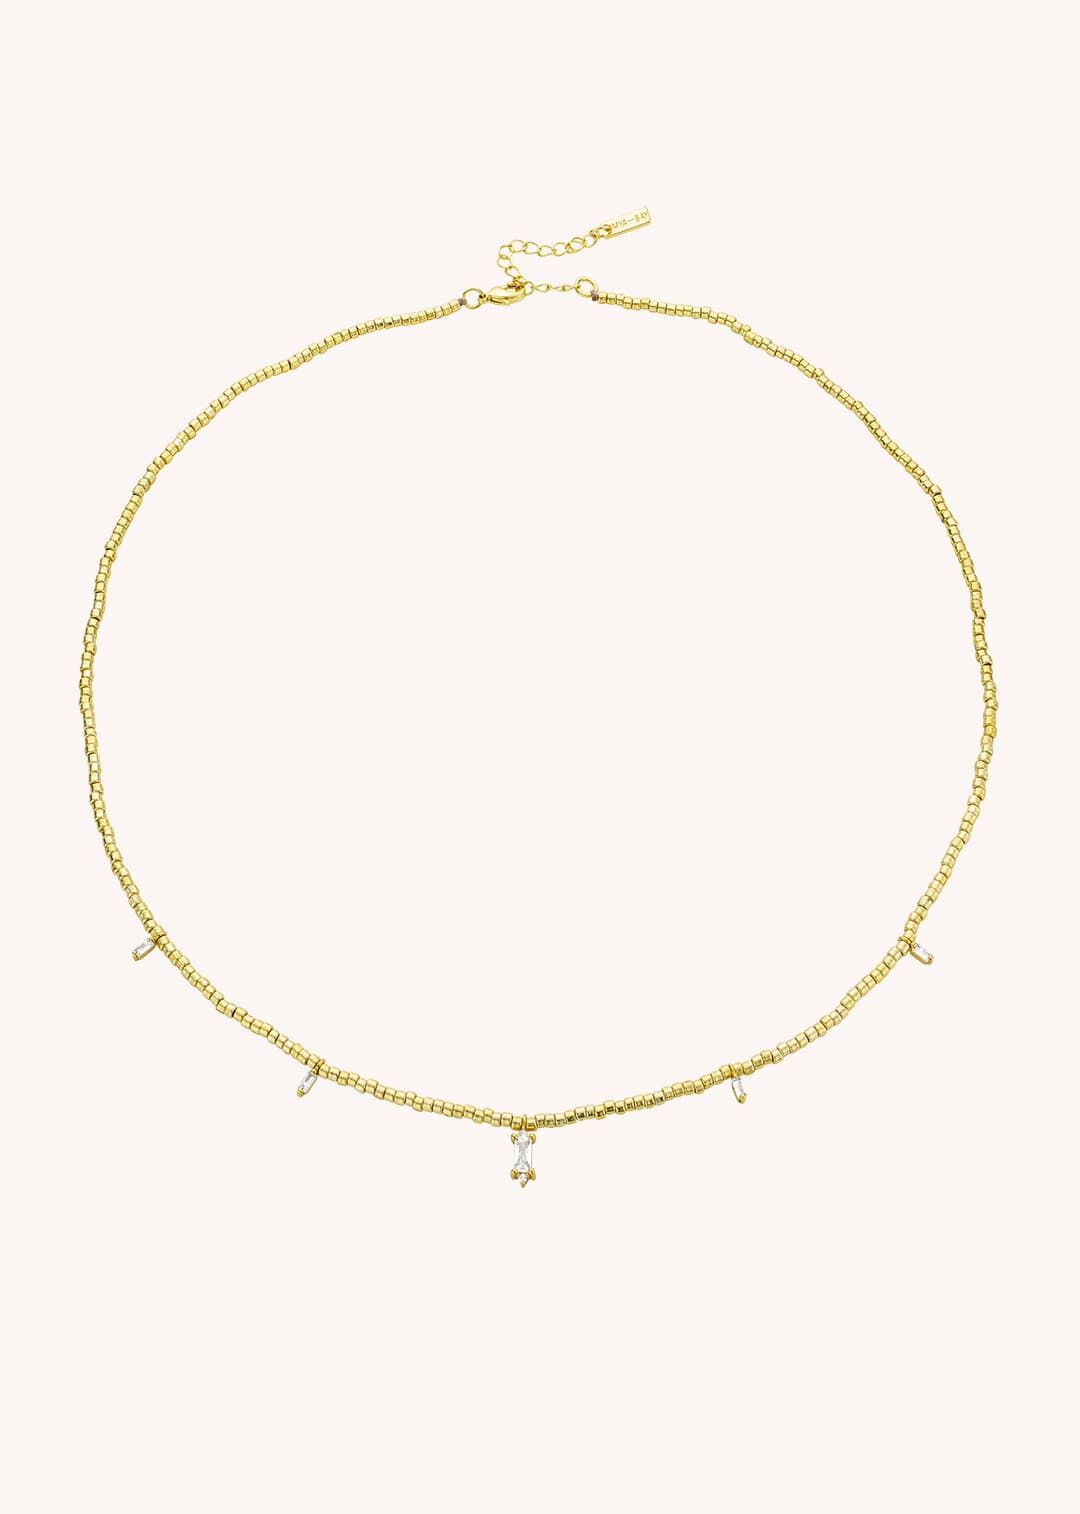 Necklace Co-205g Gold